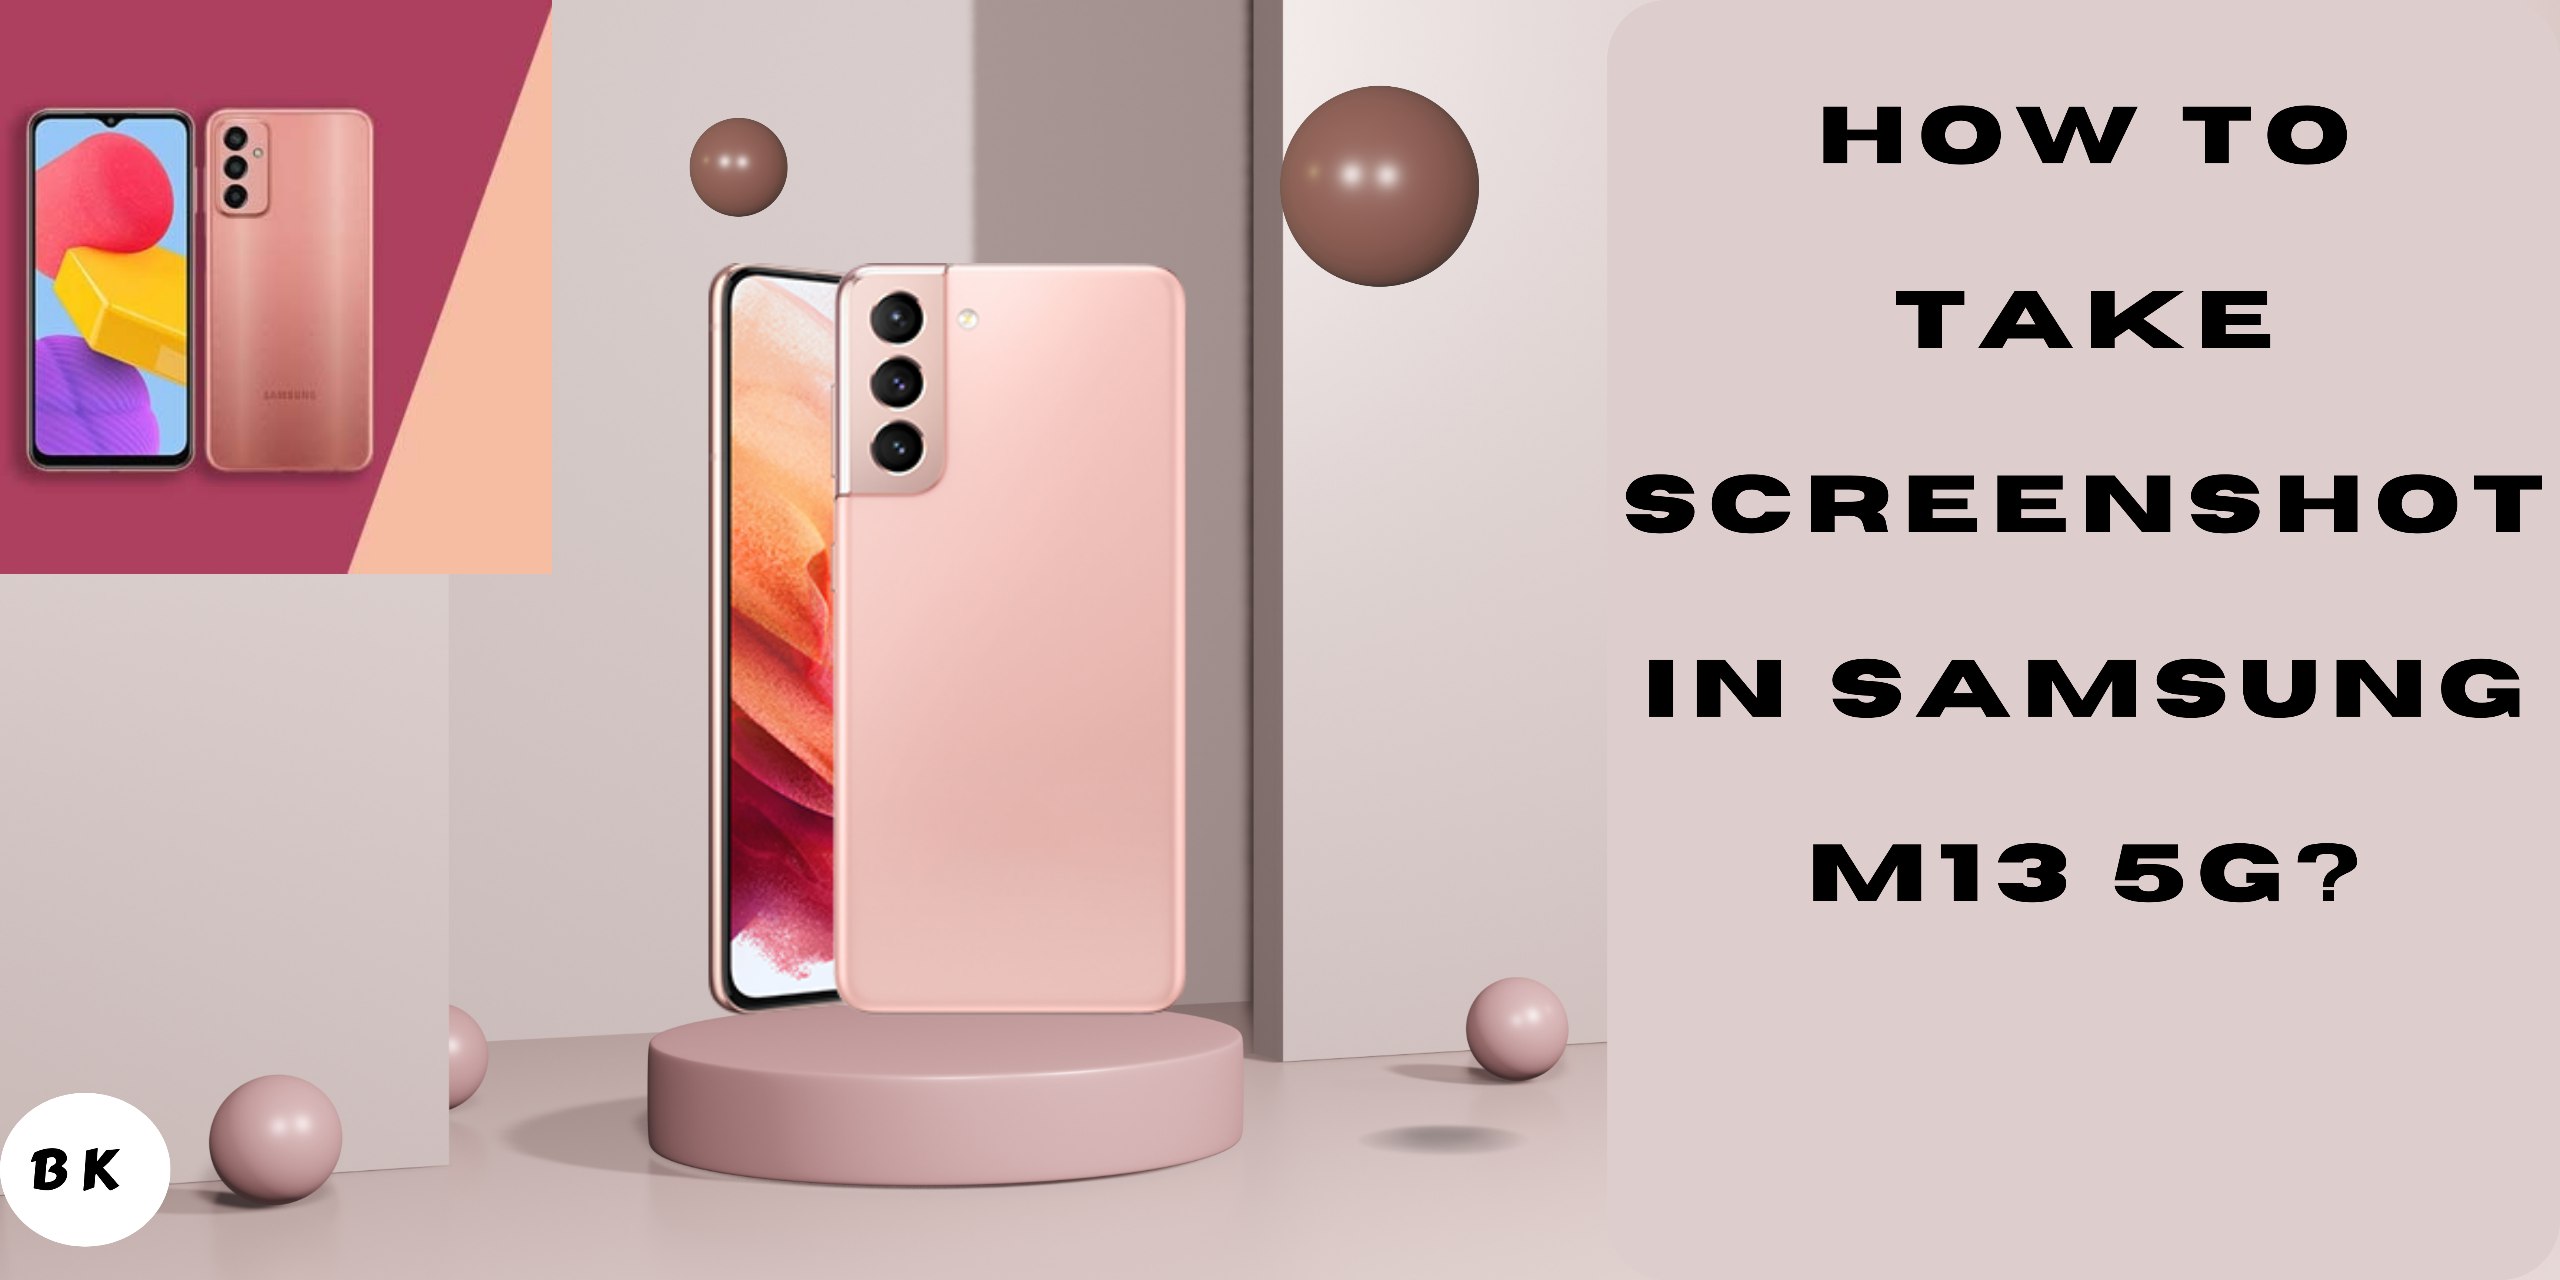 How to Take Screenshots in Samsung M13 5G